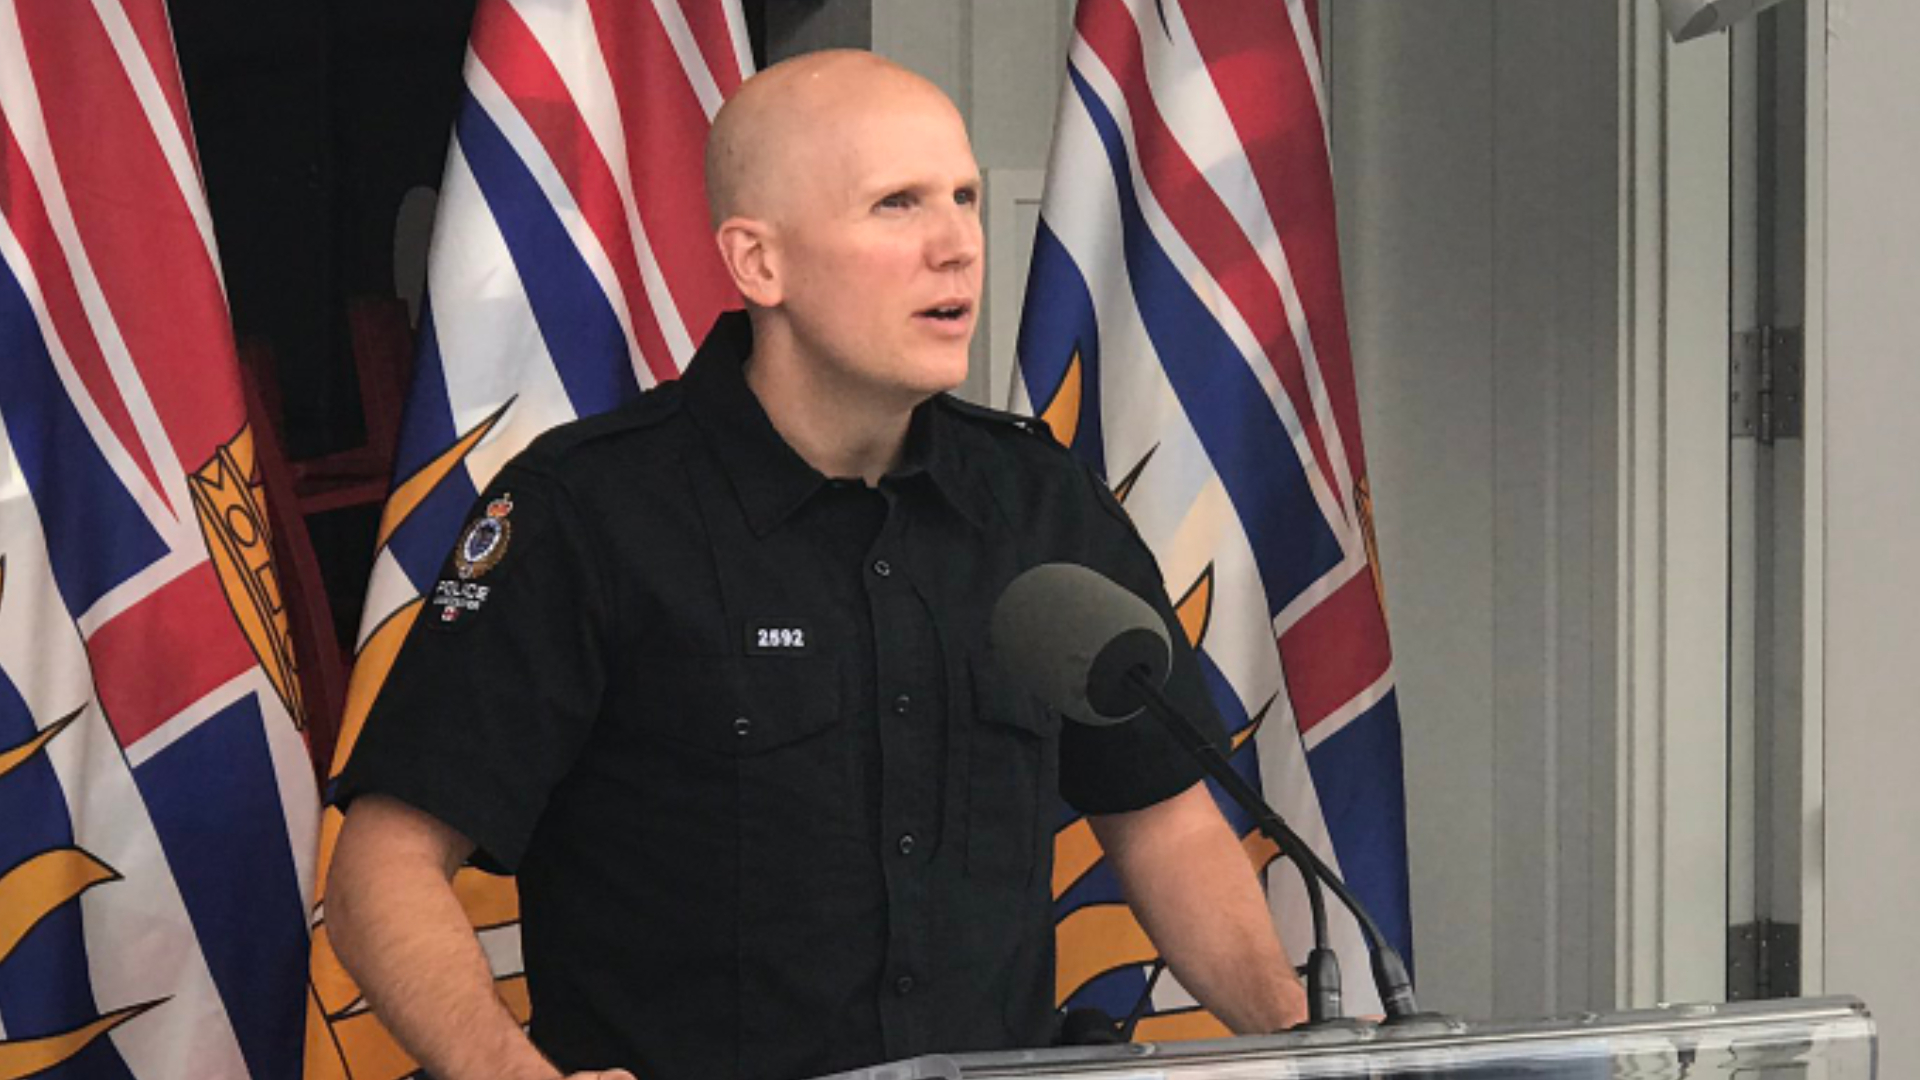 Vancouver police officer accused of discrimination, bullying, harassment in civil claim